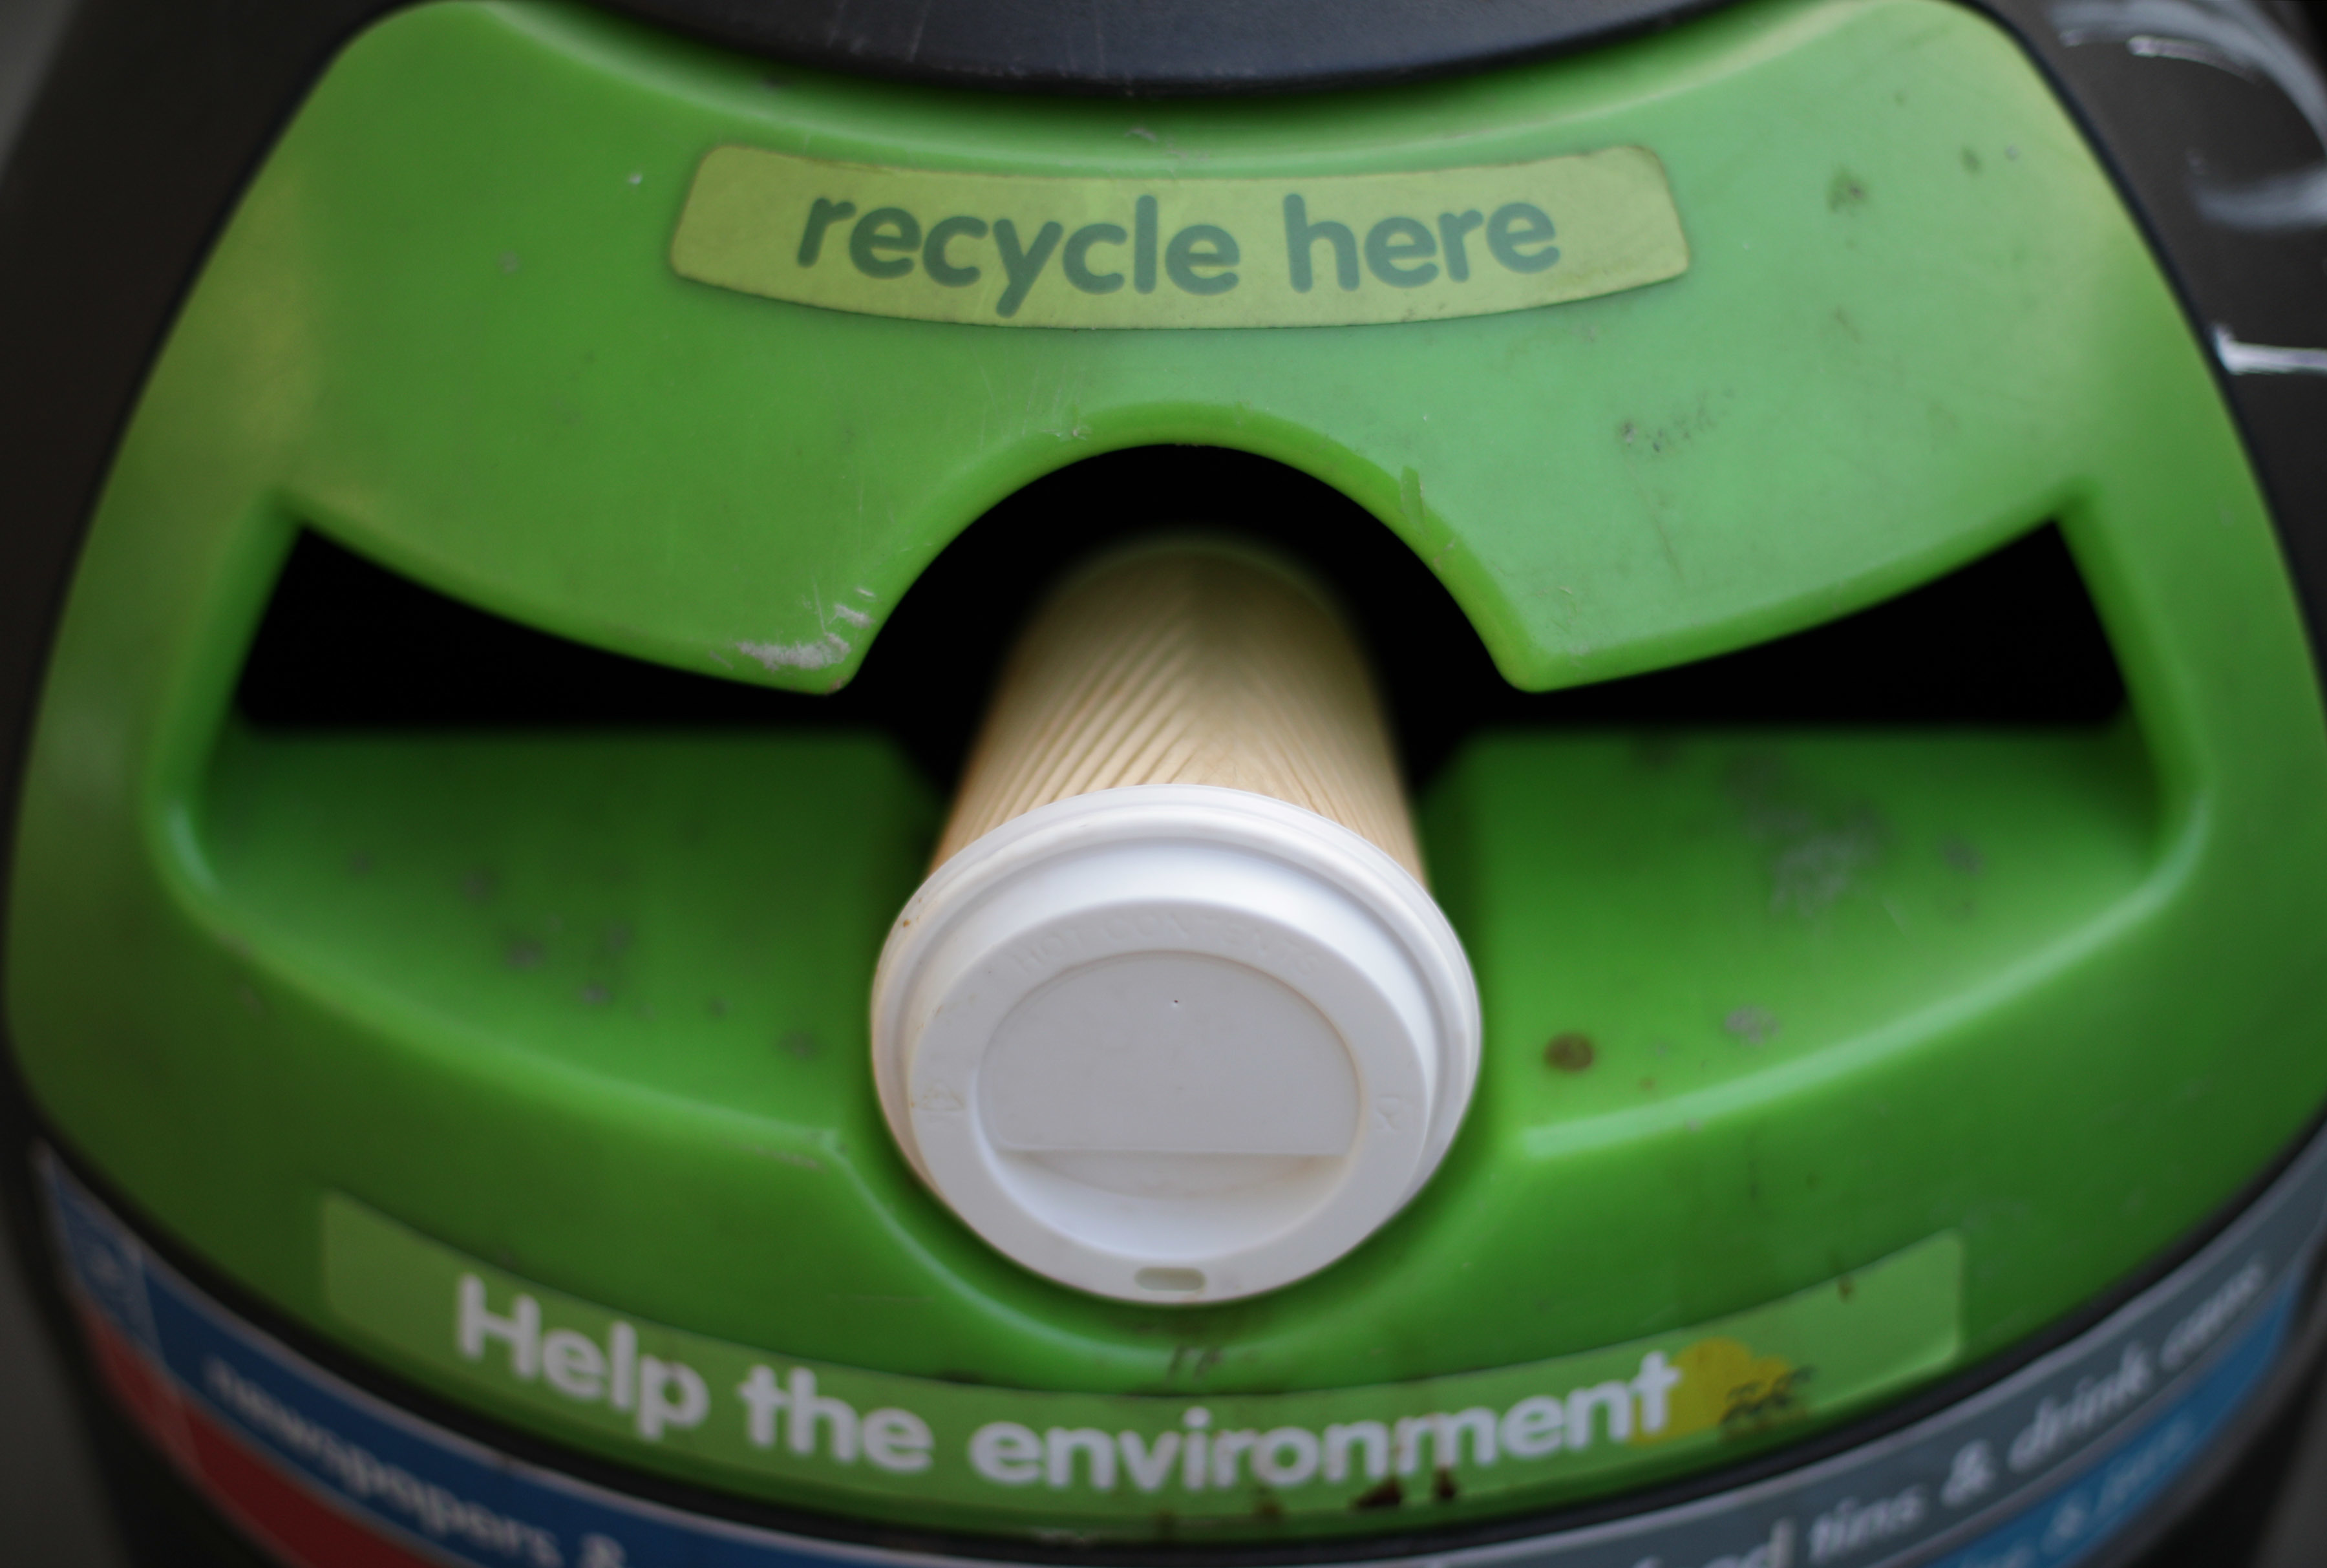 A coffee cup placed on a green recycling bin